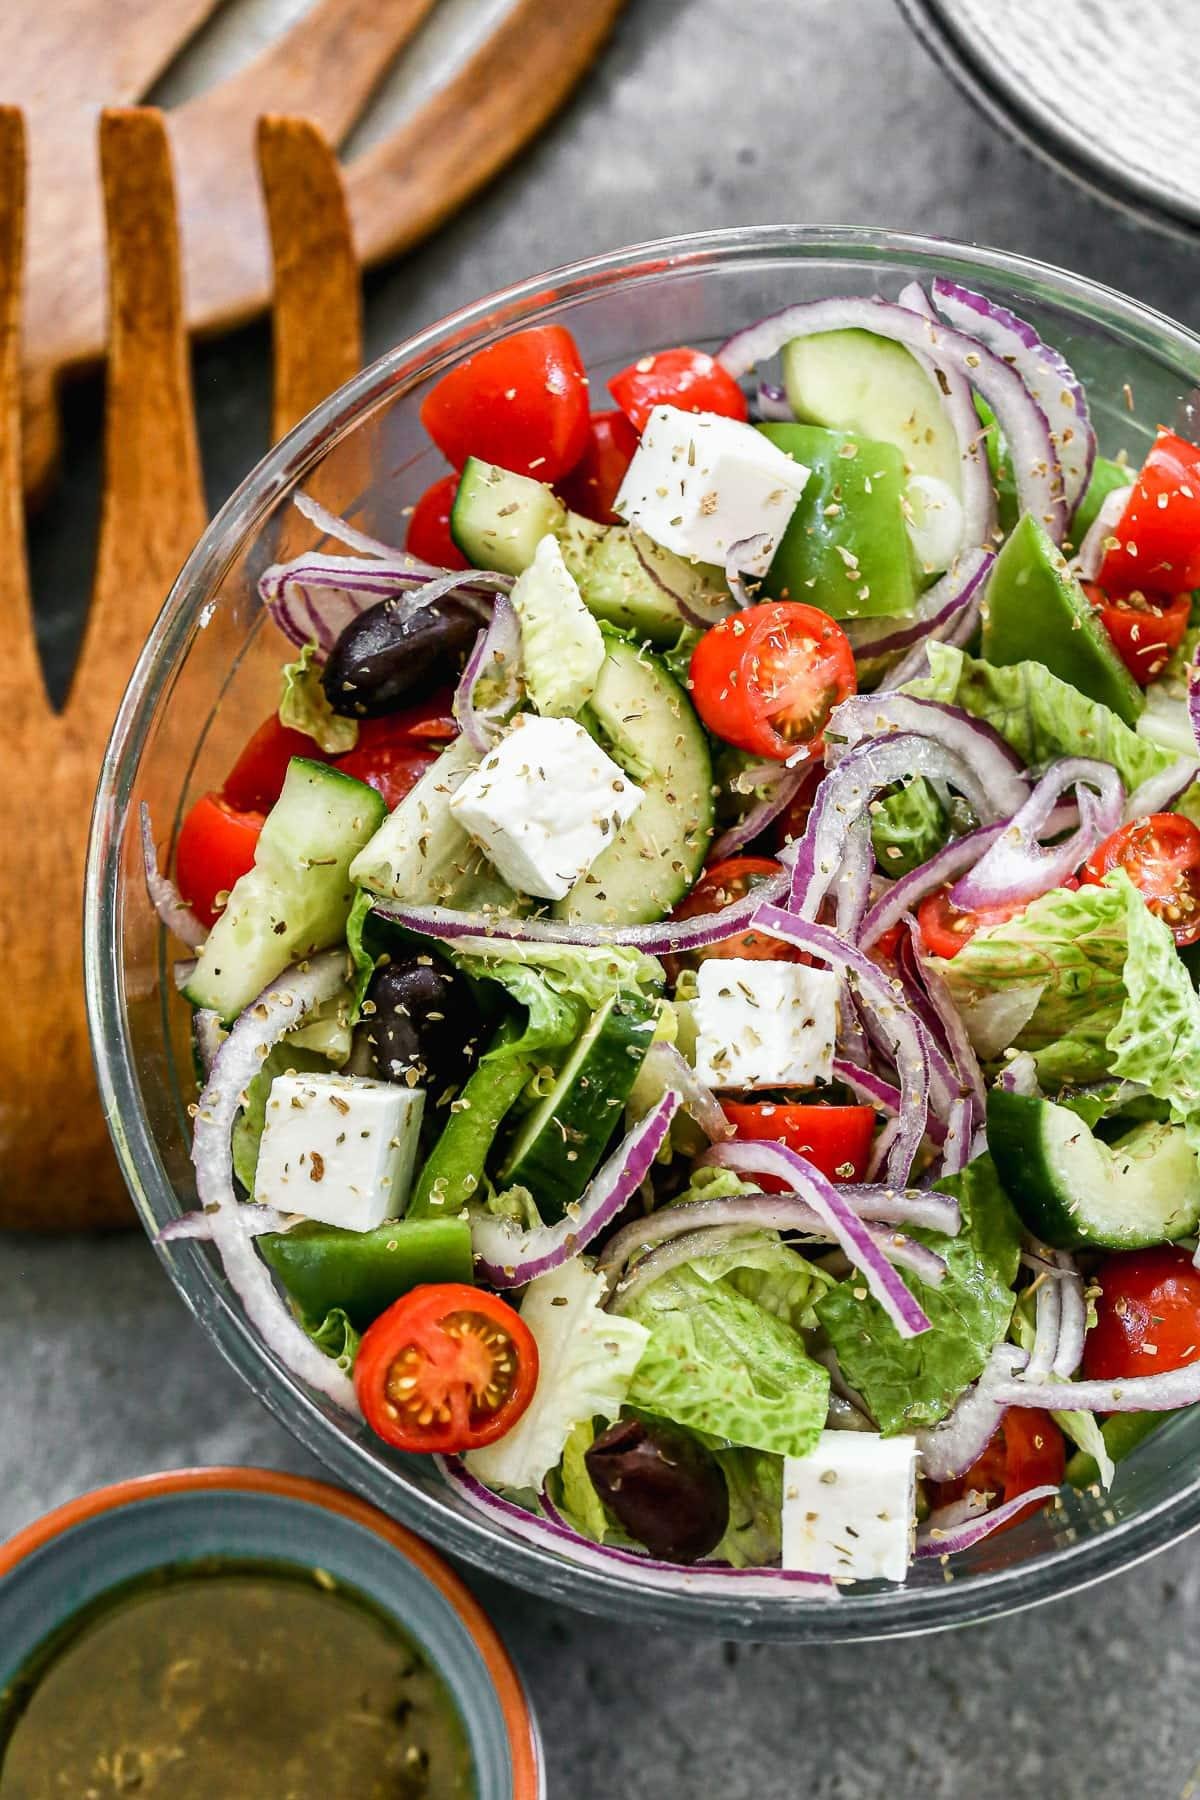 Indulge In The Flavors of The Mediterranean with This Easy Greek Salad Recipe